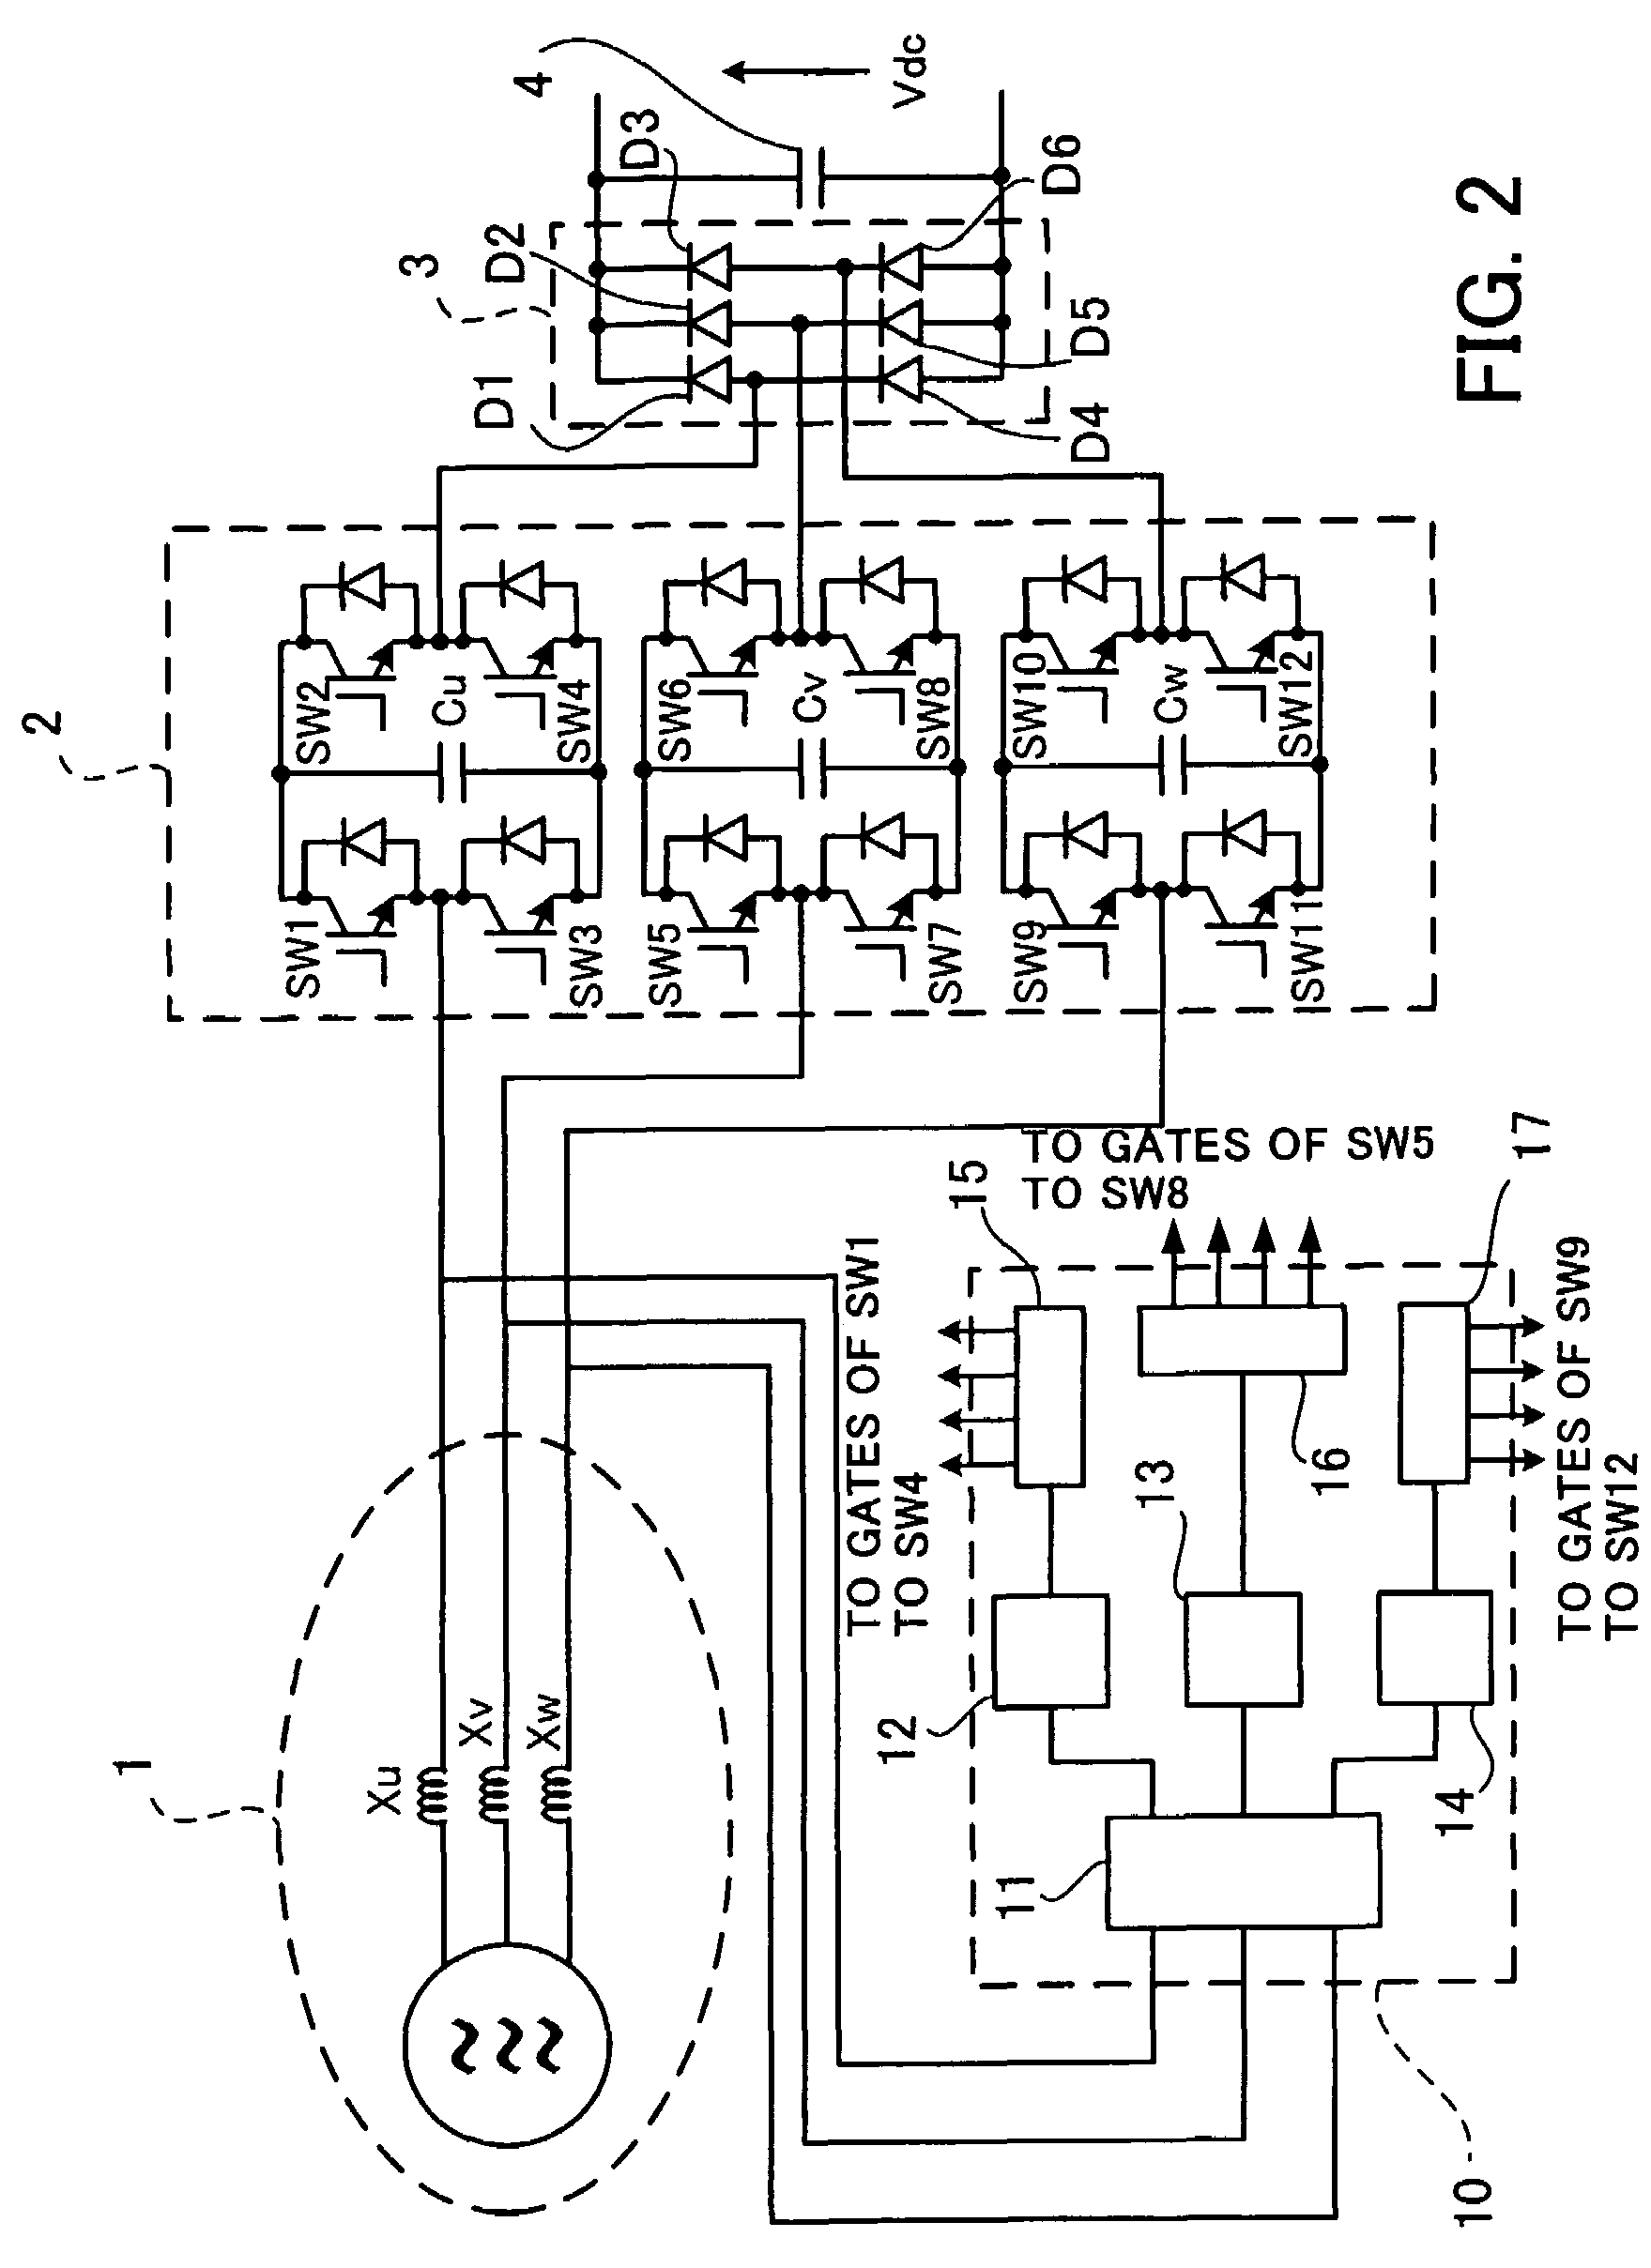 System linking apparatus for generated electric power